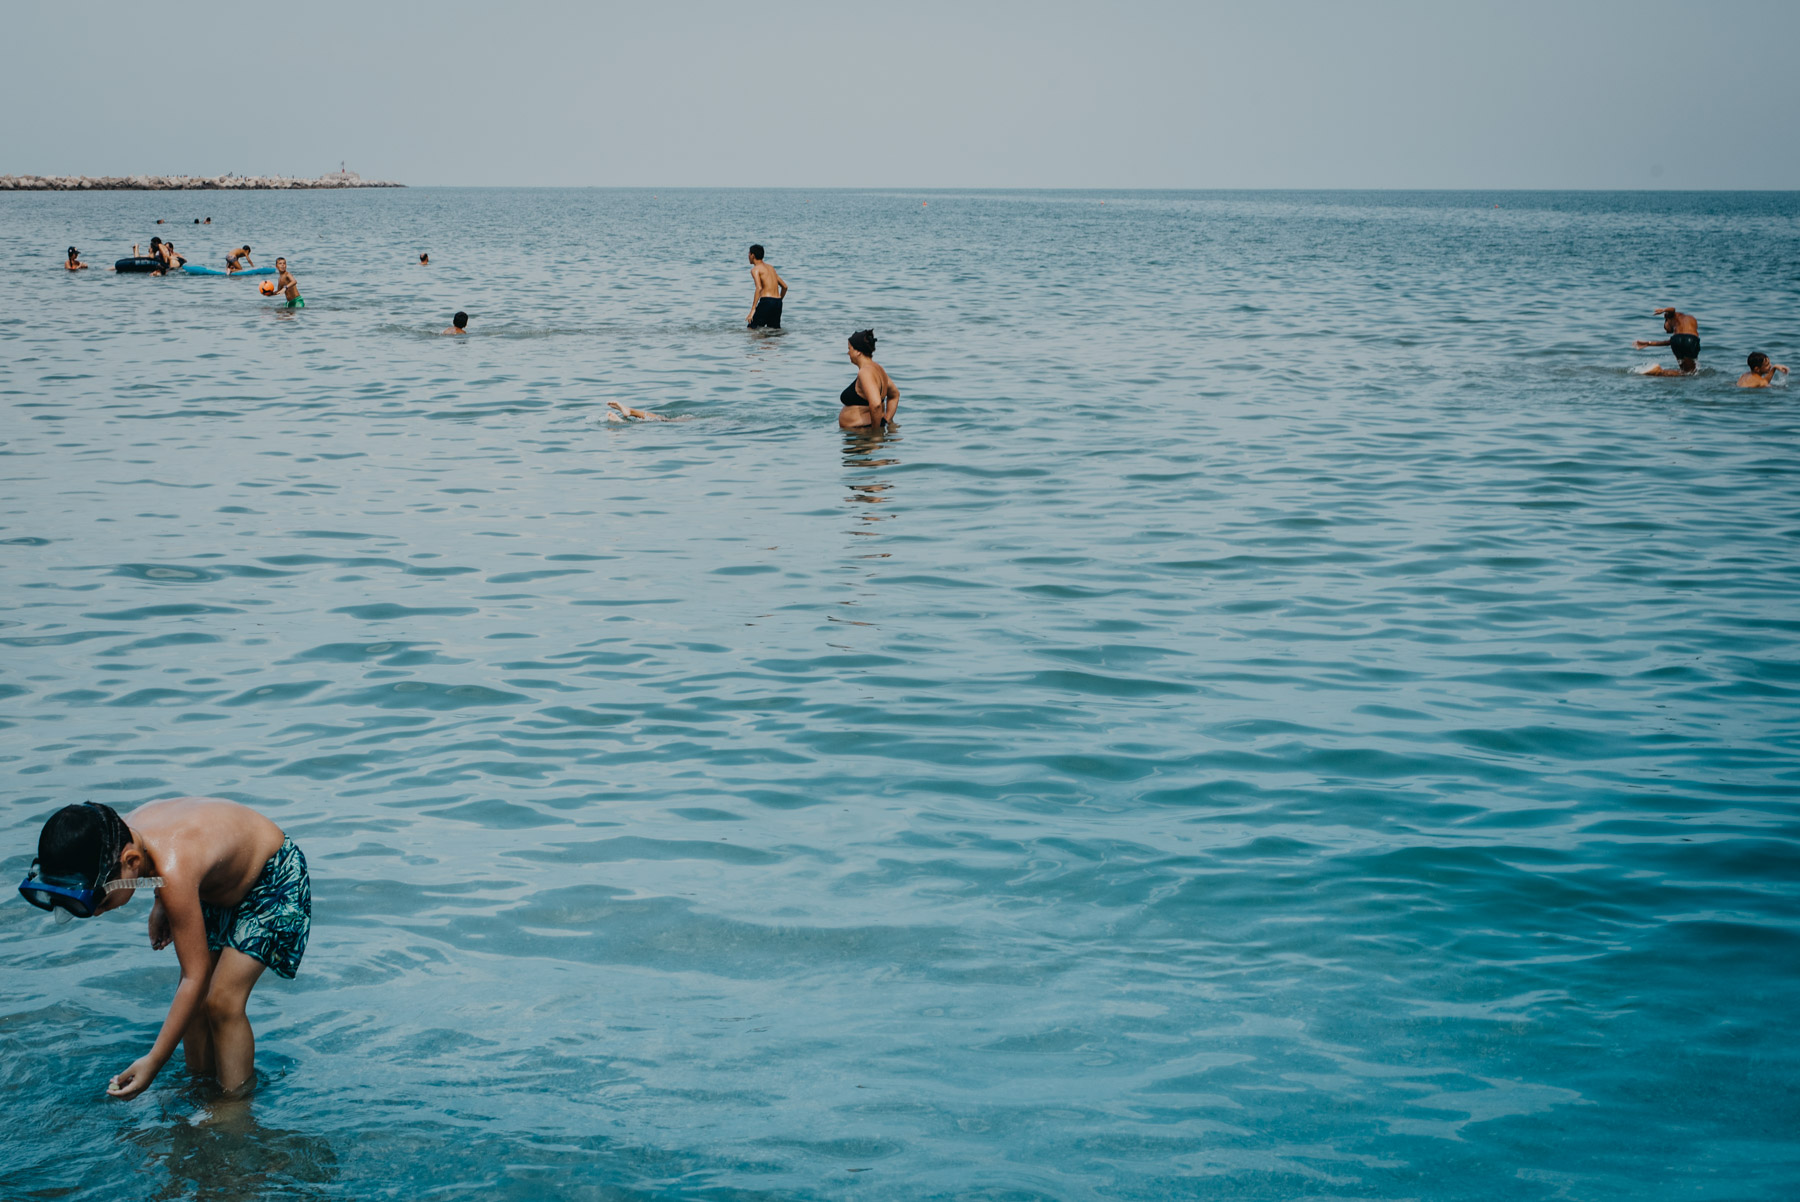 People anche children playing at the beach in the blue sea in the mediterranean sea in the city of Barletta, Apulia